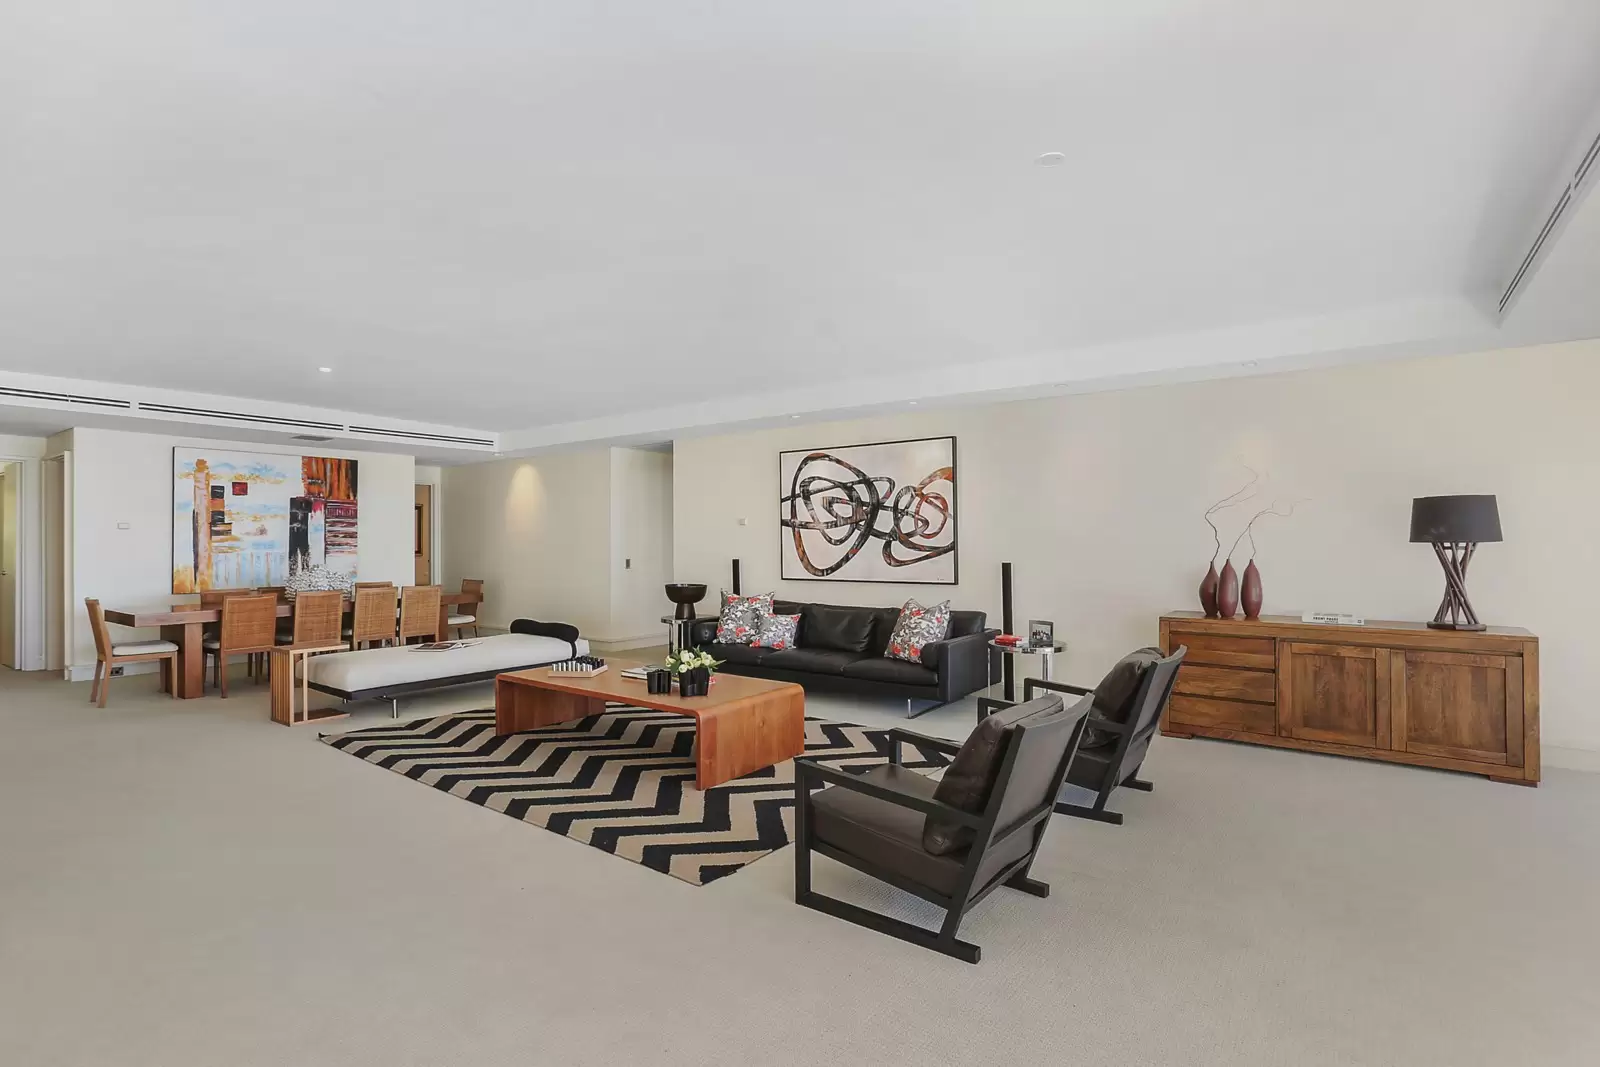 Photo #4: 3/589 New South Head Road, Rose Bay - Sold by Sydney Sotheby's International Realty